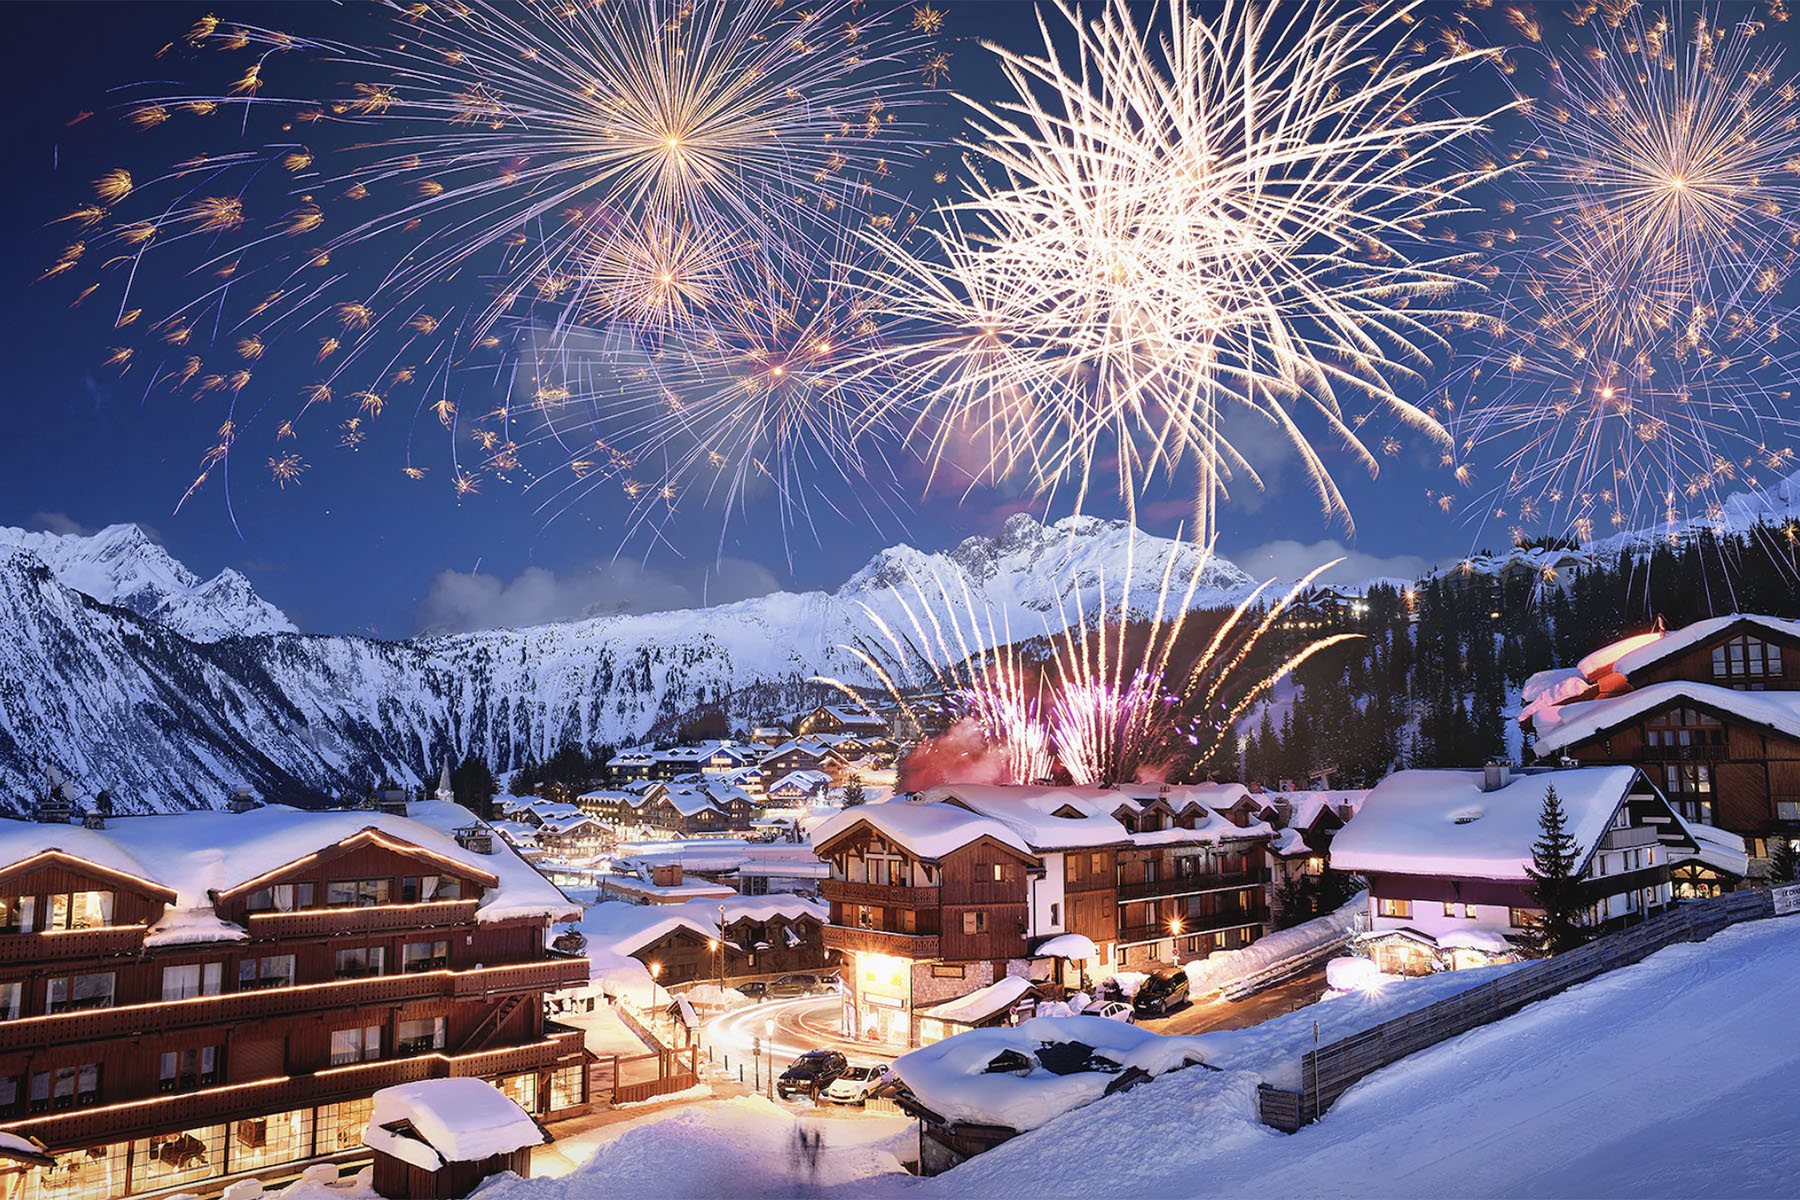 8 luxury ski resorts you’ll wish you could spend the yearend holidays at